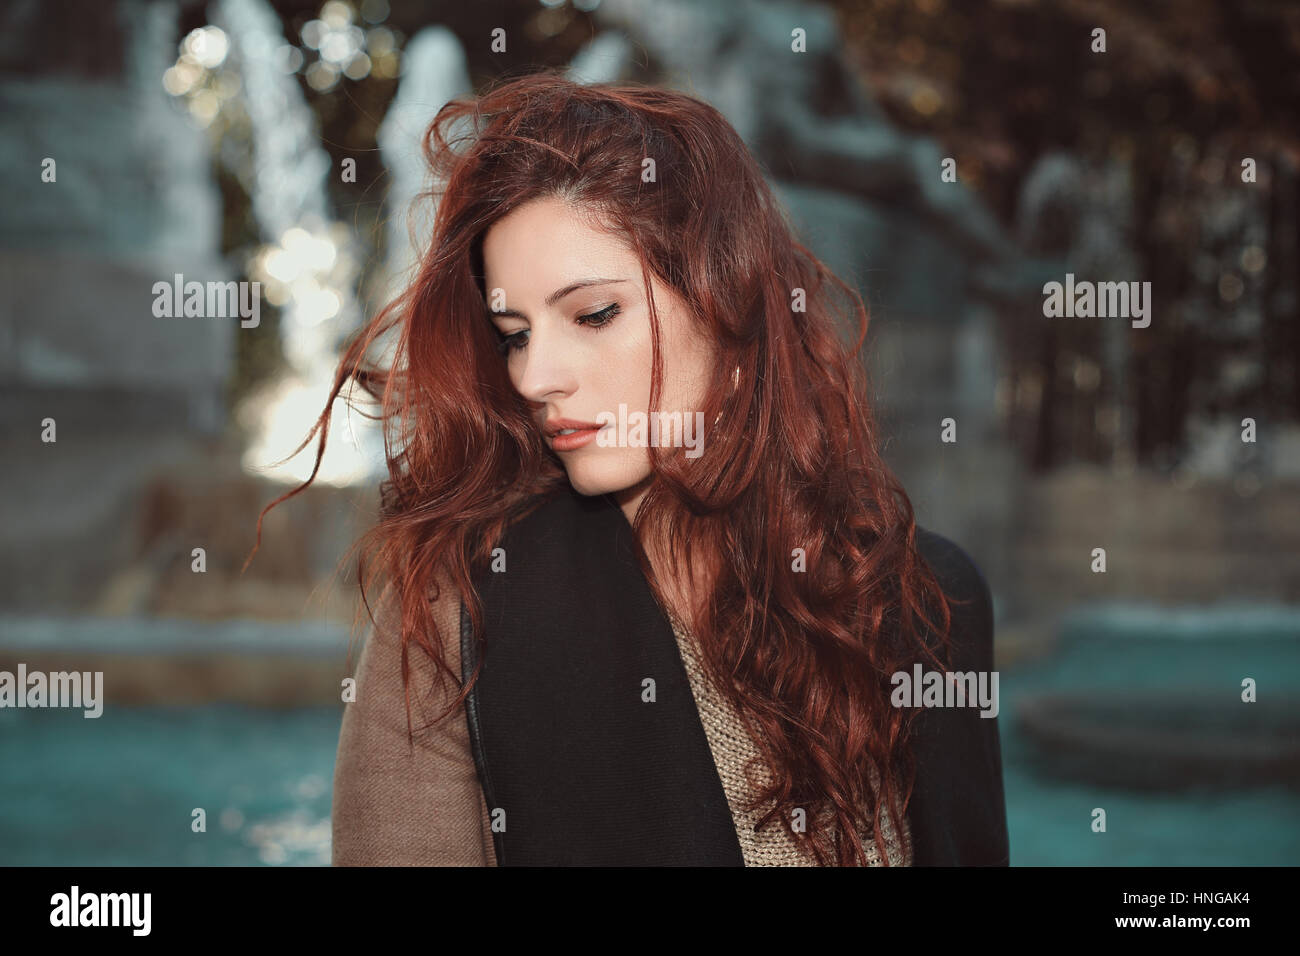 Beautiful young woman with red hair . Fountain background Stock Photo